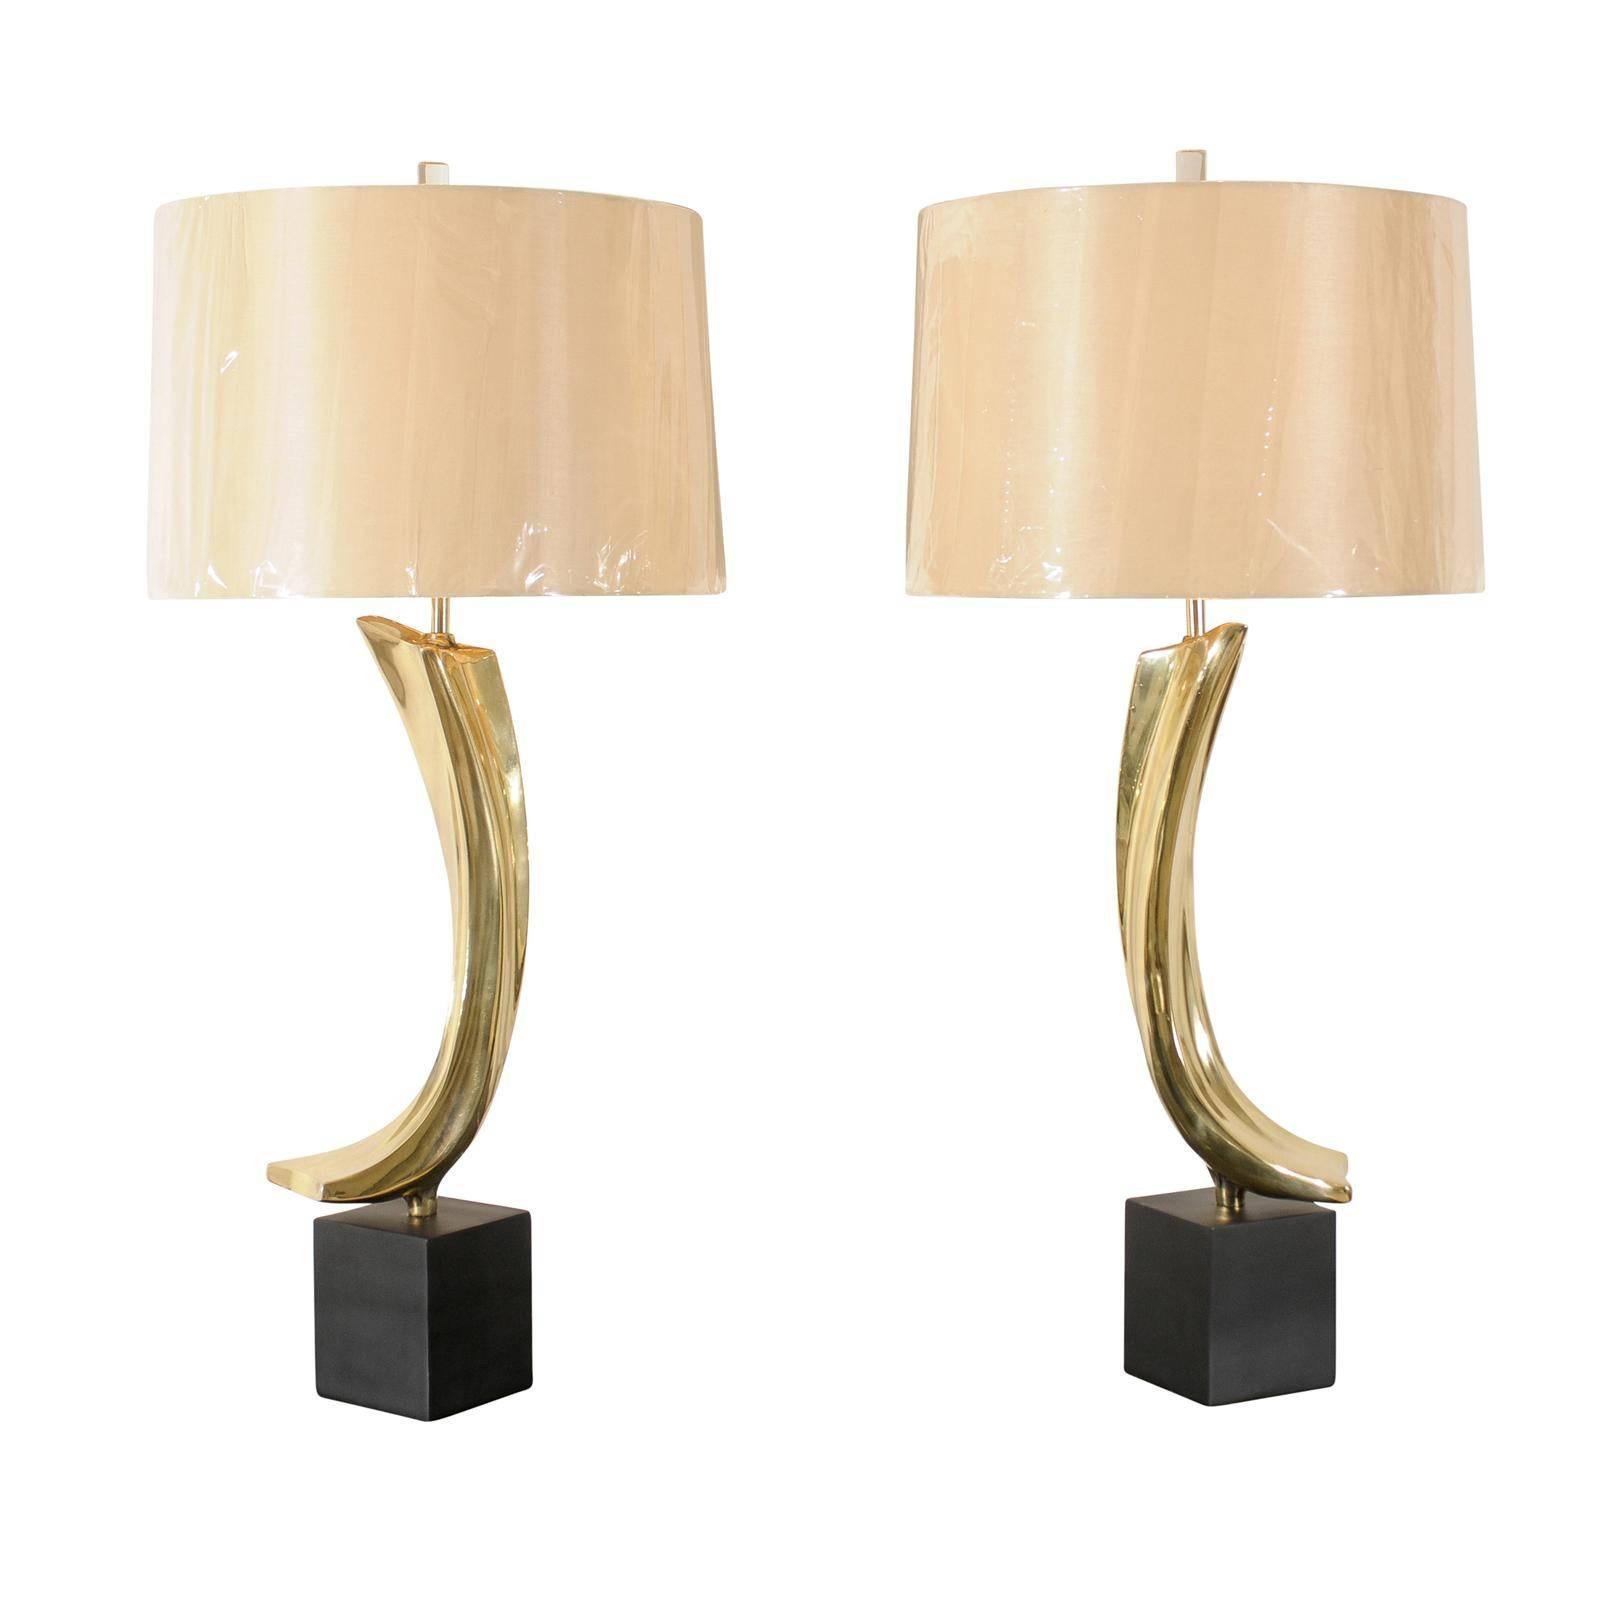 Magnificent Restored Sculptural Pair of Large-Scale Lamps by Laurel, circa 1970